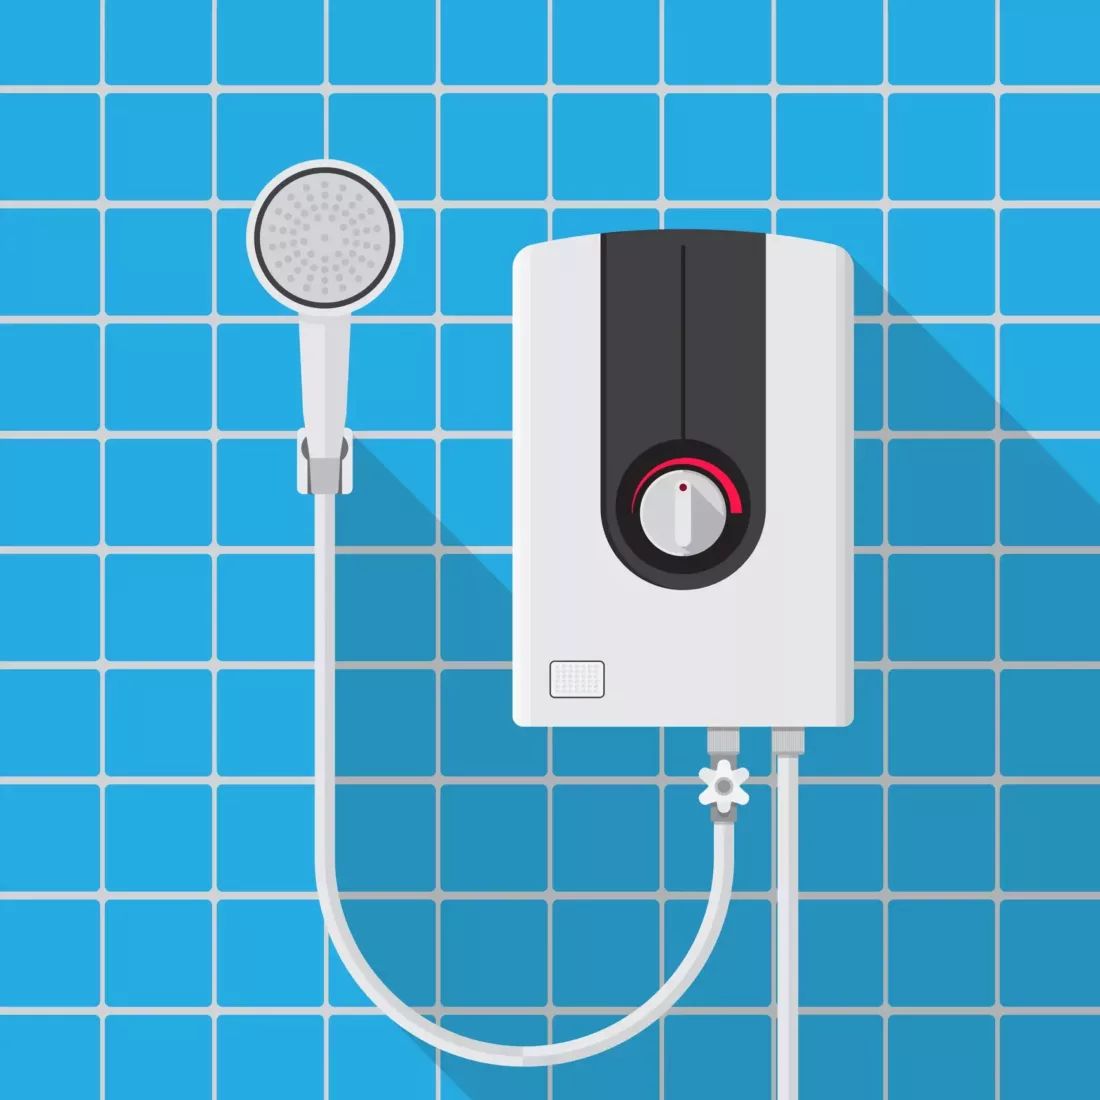 Electric Shower Vector